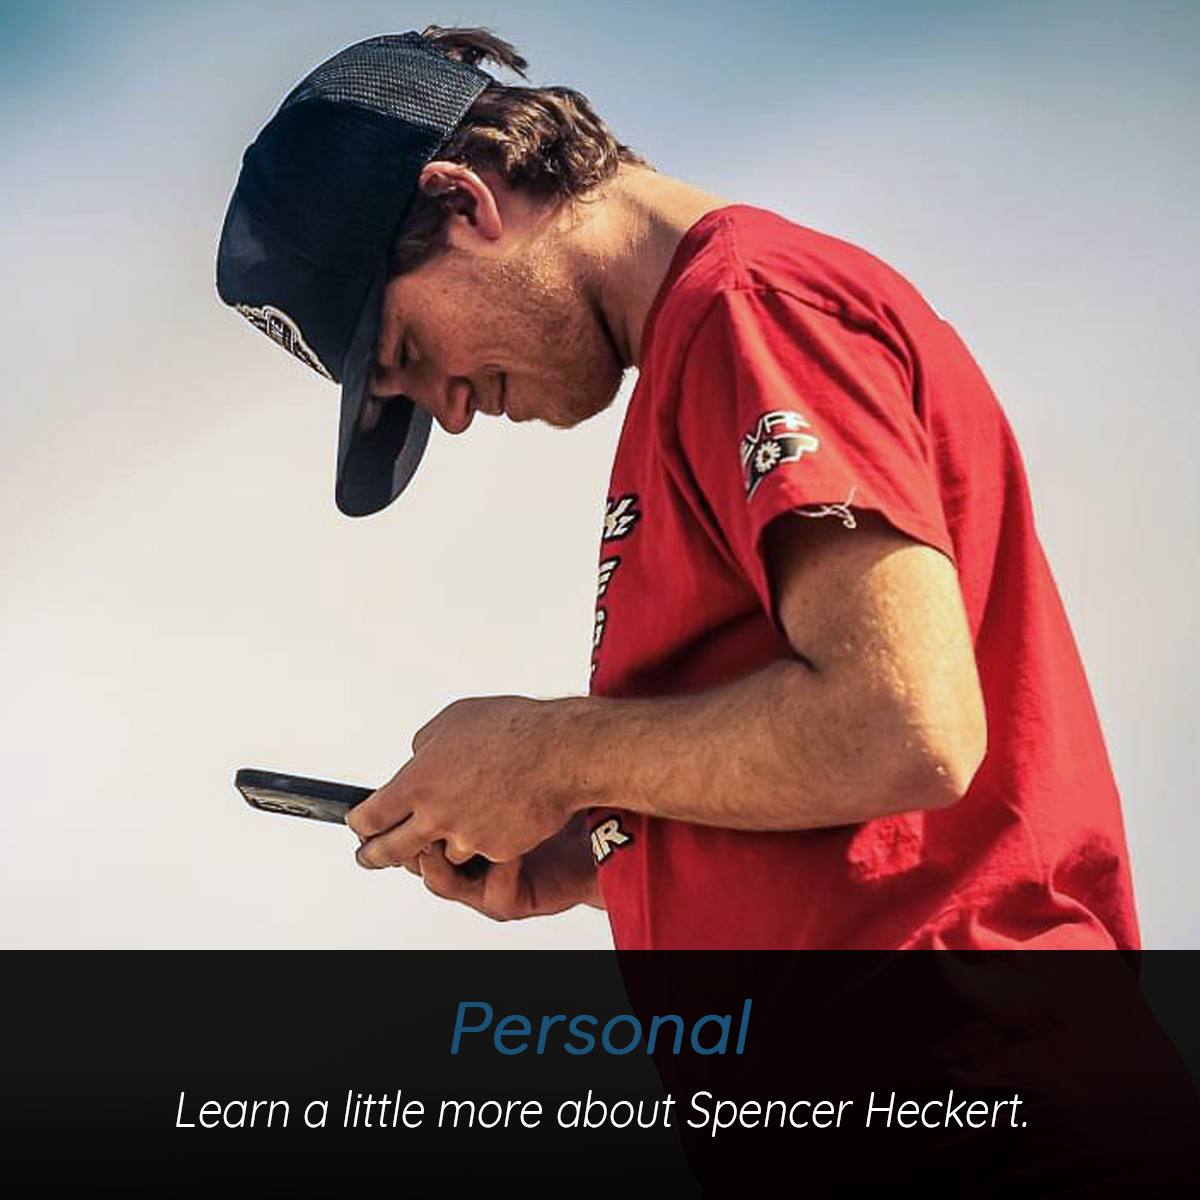 Learn a little more about Spencer Heckert.